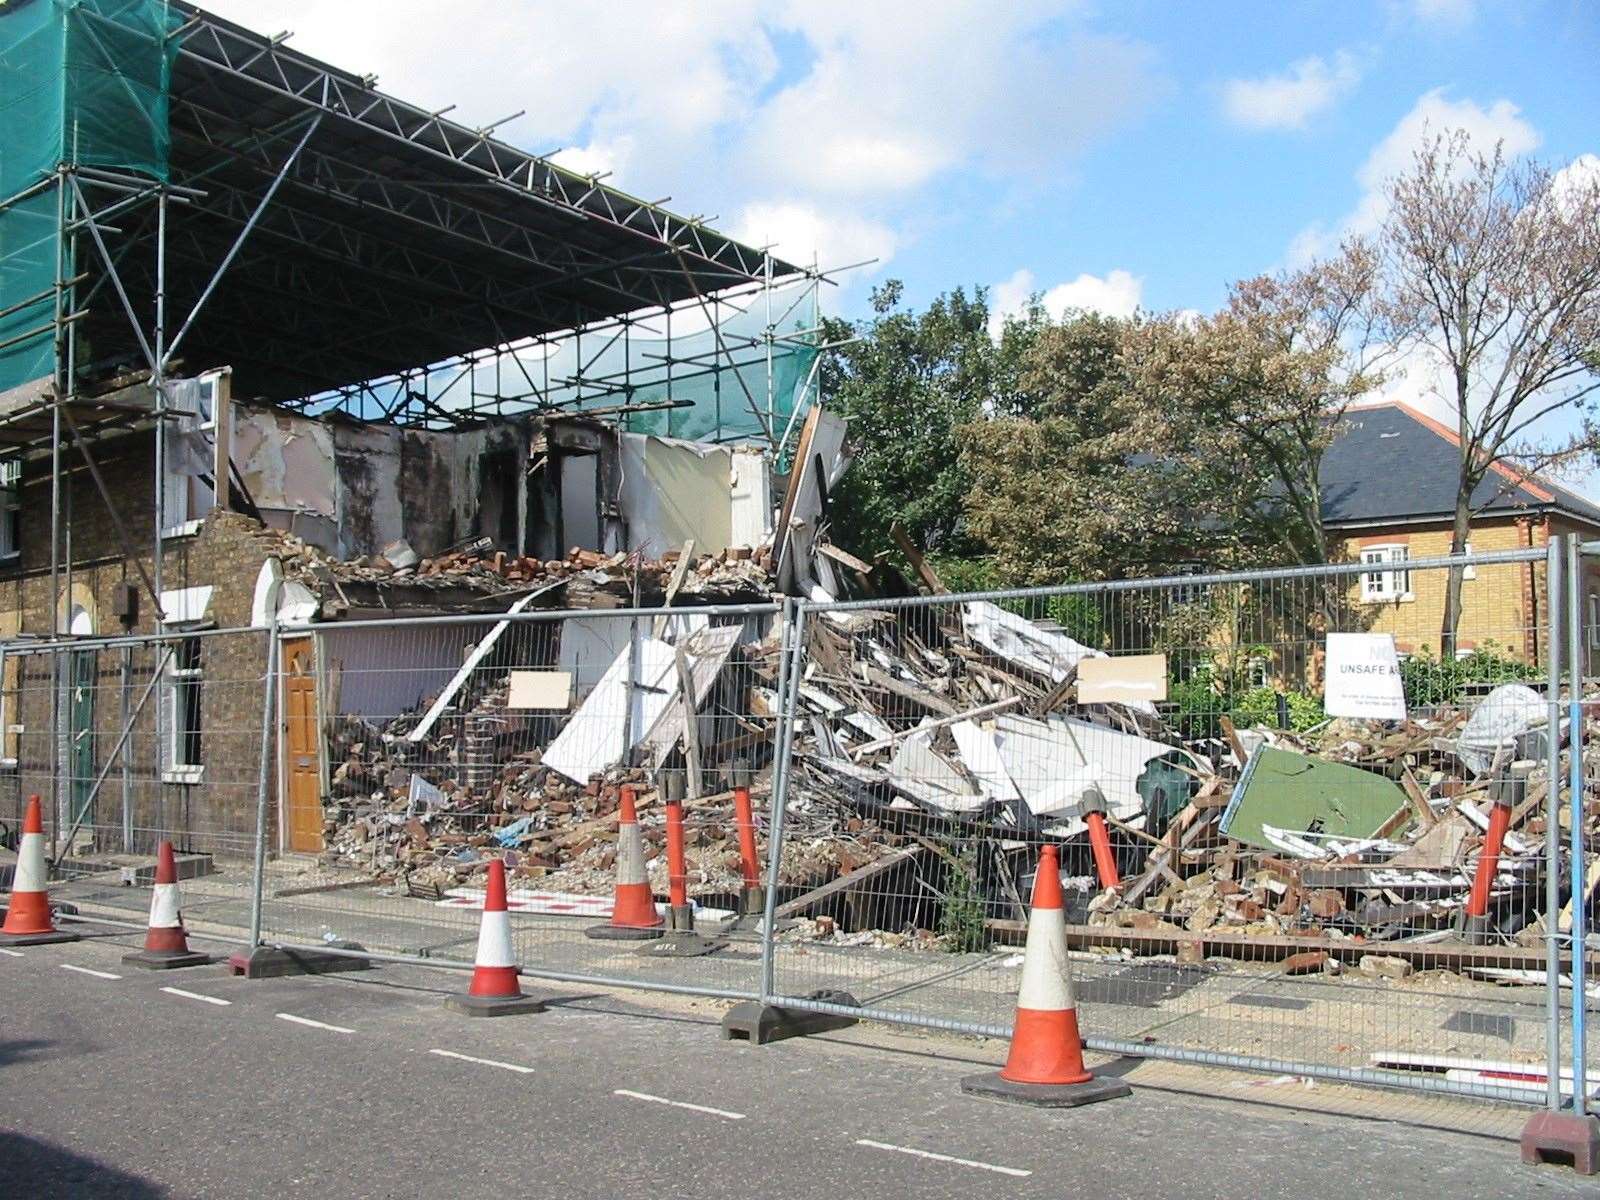 Many surrounding homes were left seriously damaged after the Faversham gas explosion in 2004